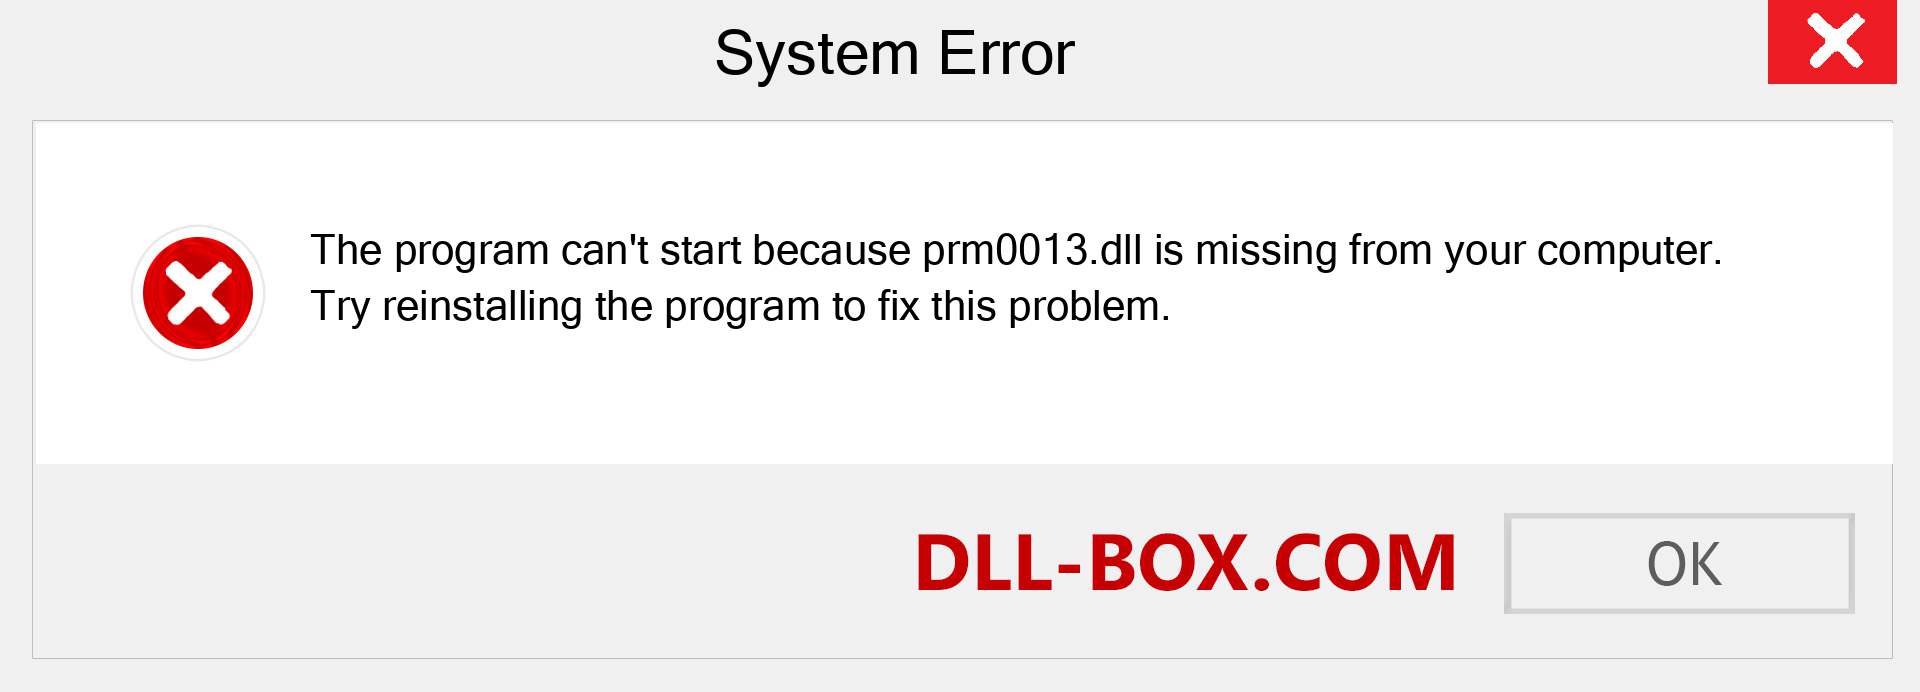  prm0013.dll file is missing?. Download for Windows 7, 8, 10 - Fix  prm0013 dll Missing Error on Windows, photos, images